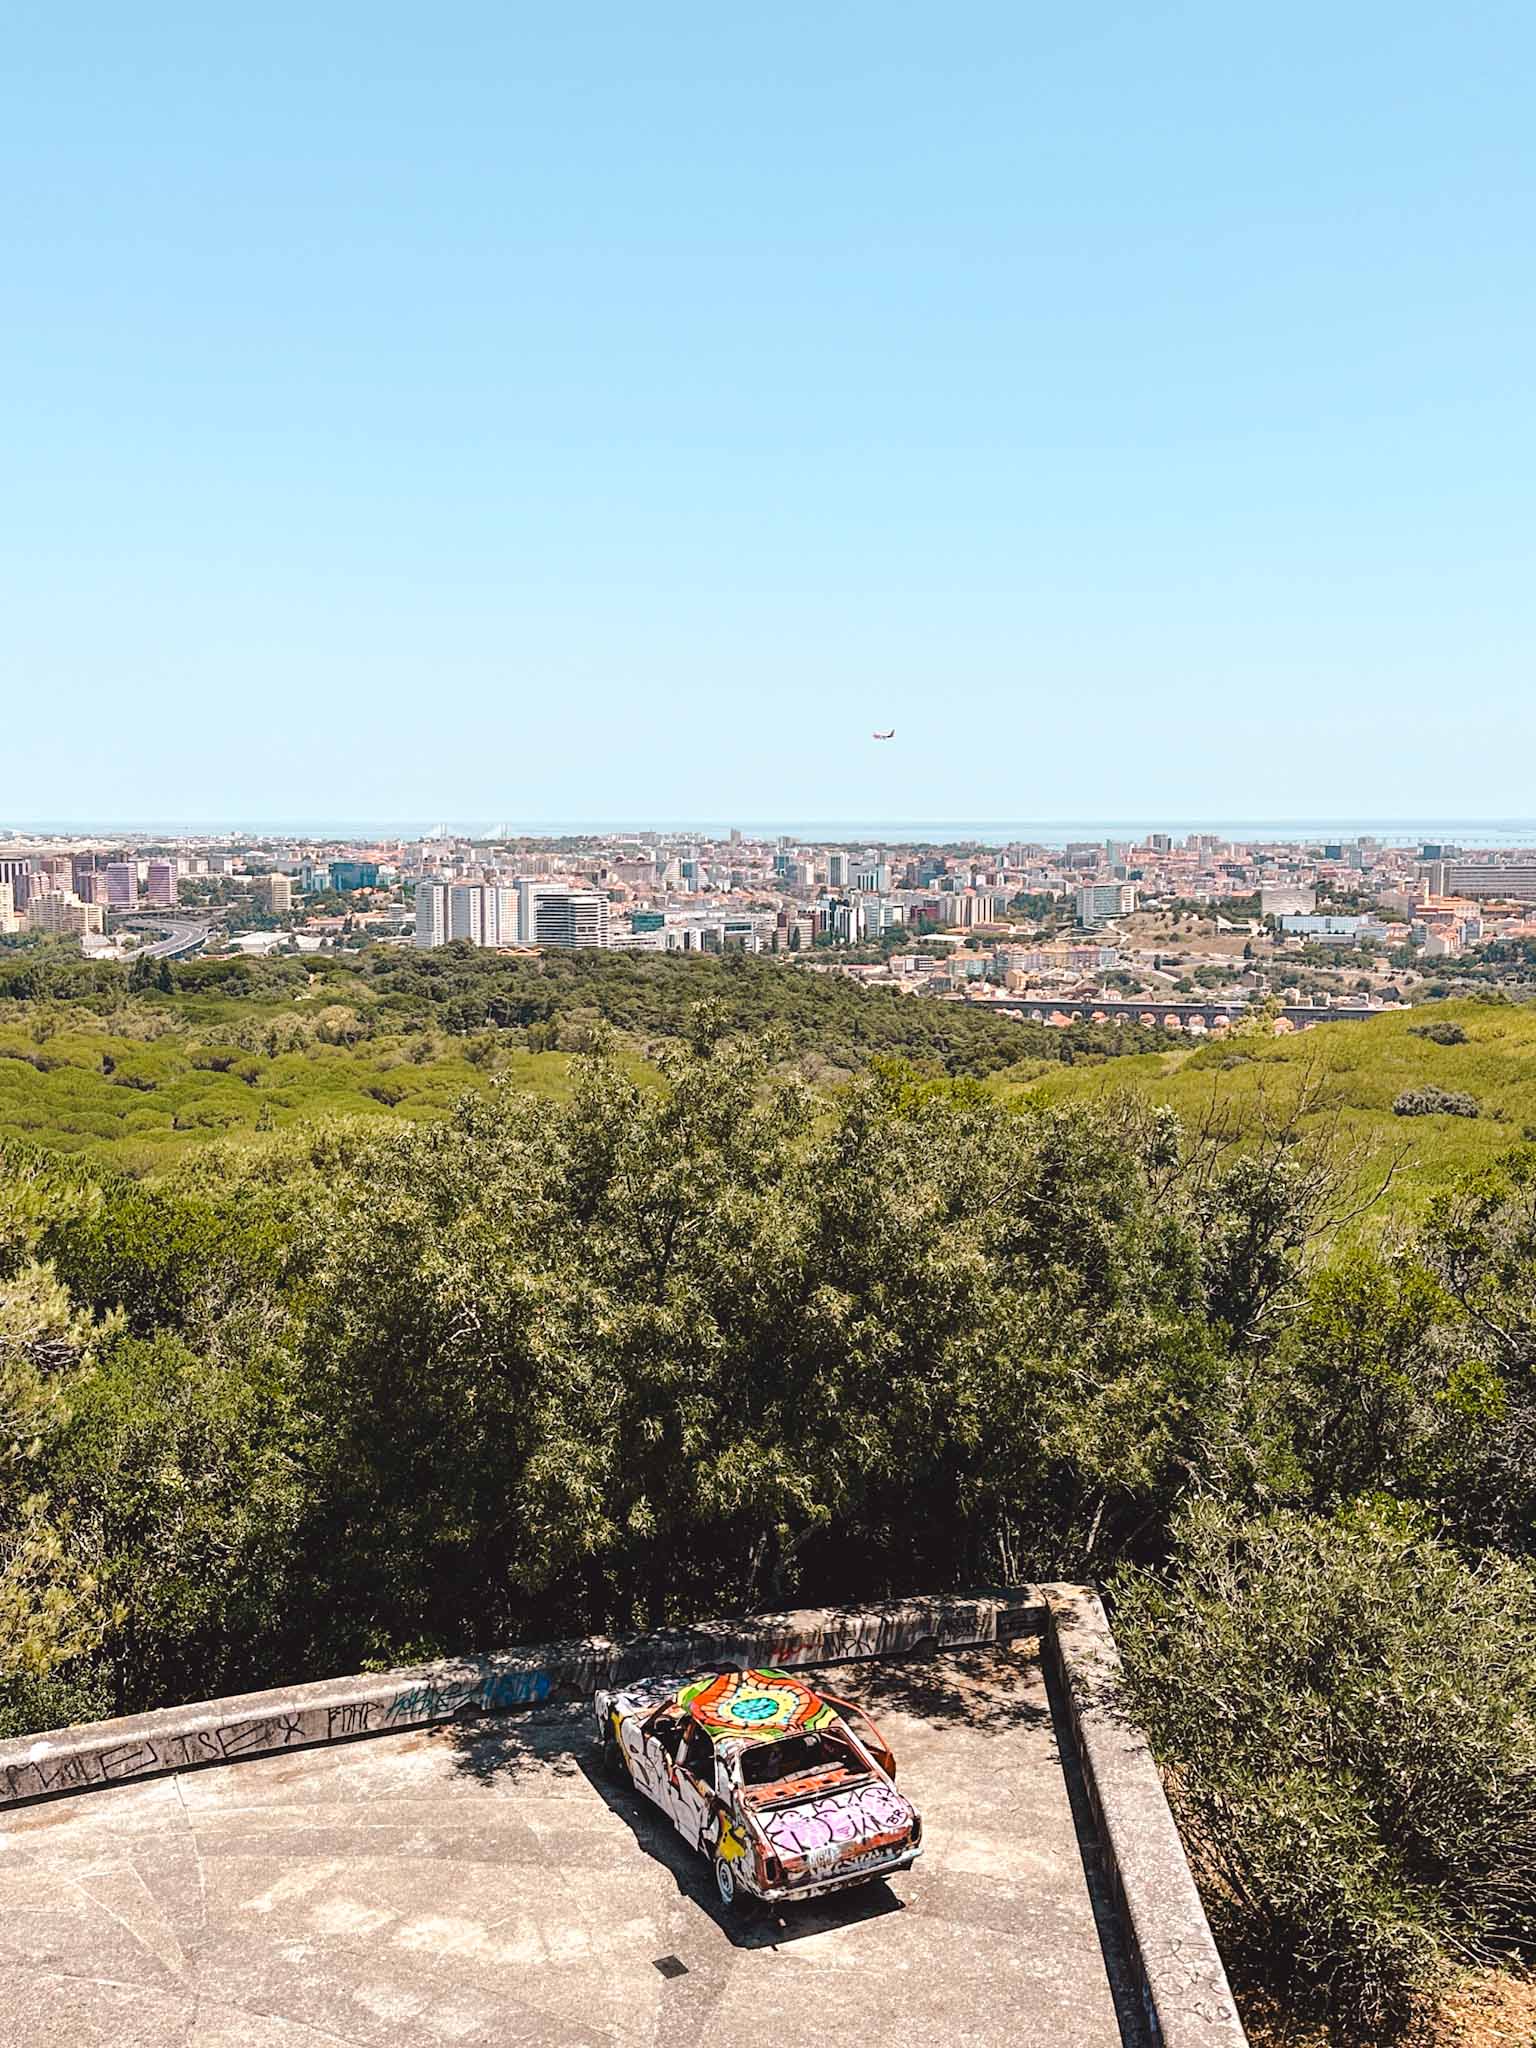 est viewpoints and rooftops in Lisbon - Panoramico de Monsanto